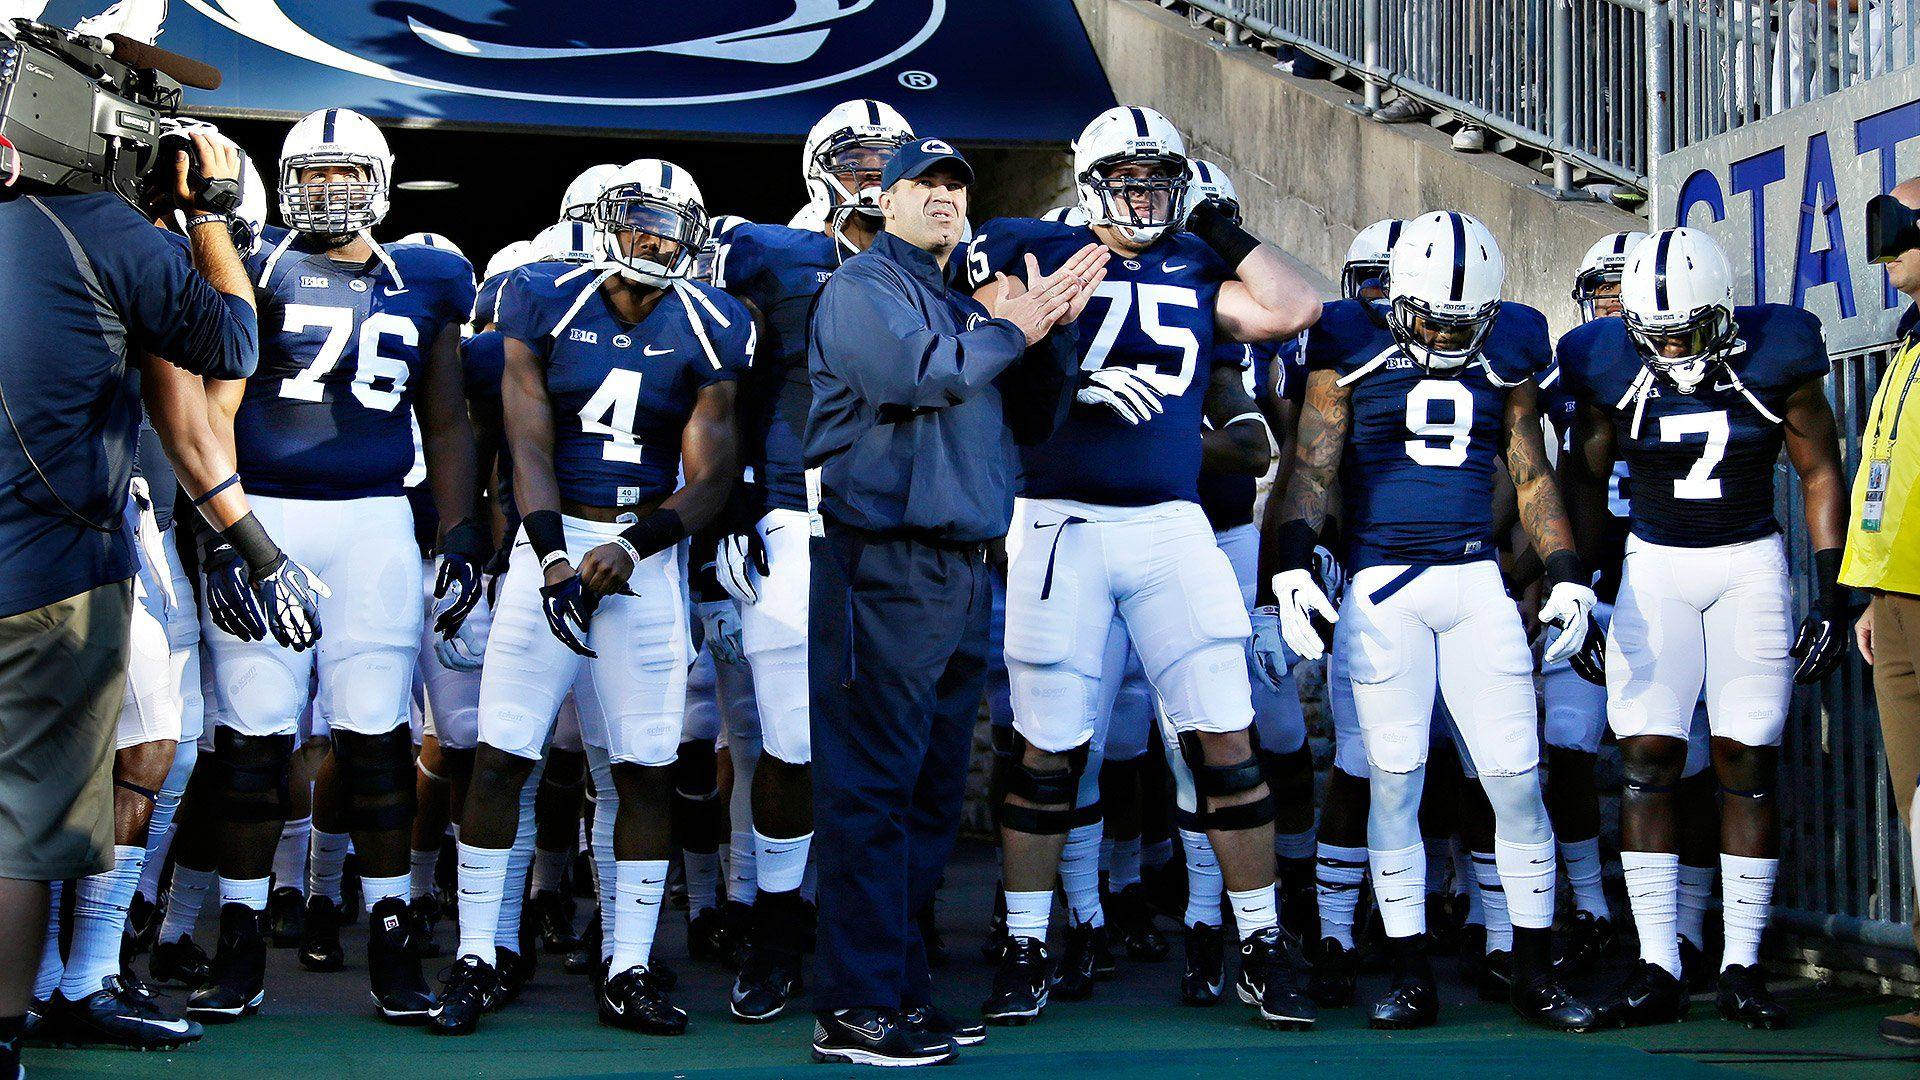 1920x1080 Penn State Football Wallpapers Top Free Penn State Football Backgrounds